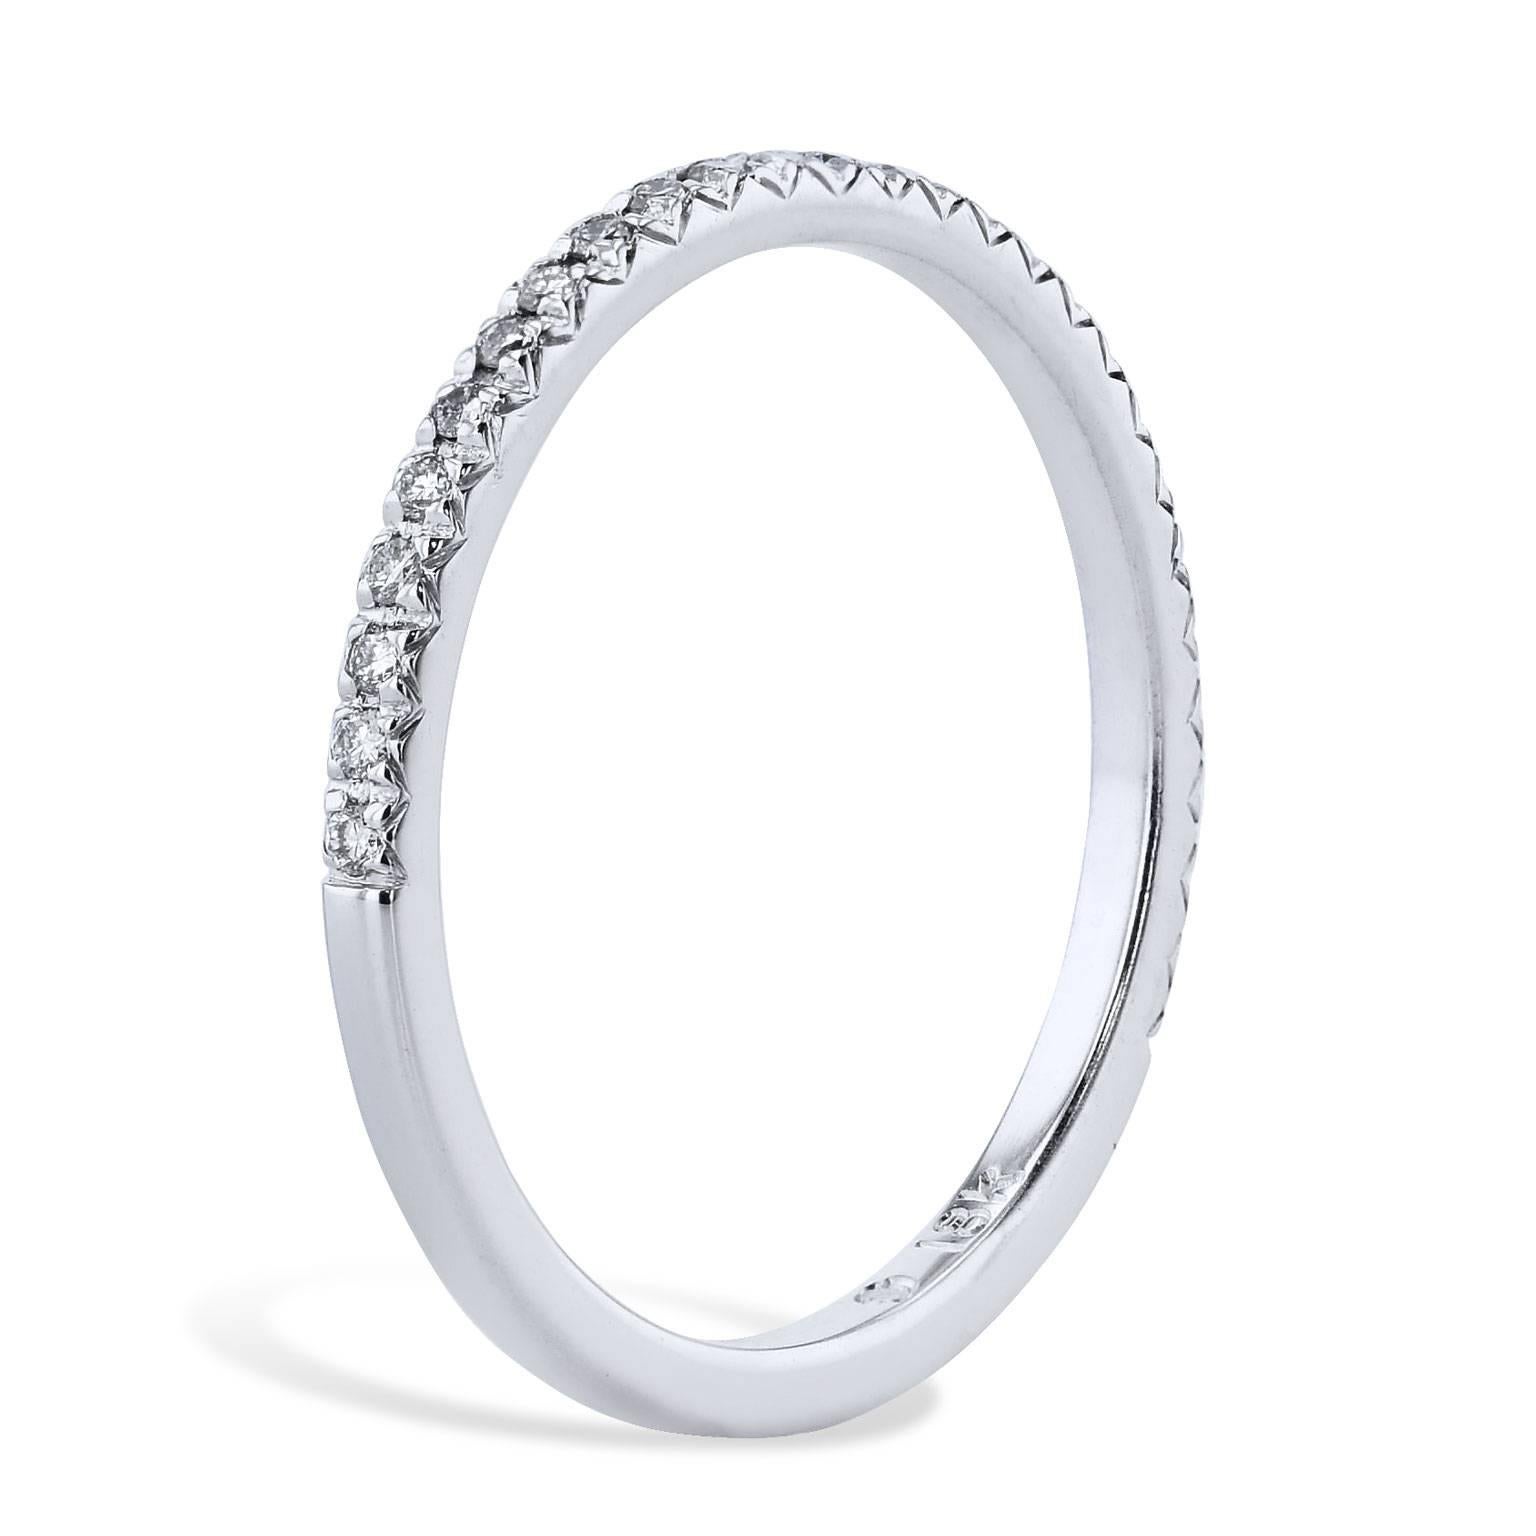 This handcrafted 18 karat white gold band ring features 0.13 carat of diamond. Each diamond is placed together to produce a ring that stirs and illuminates the essence of her beauty (size 5.5).